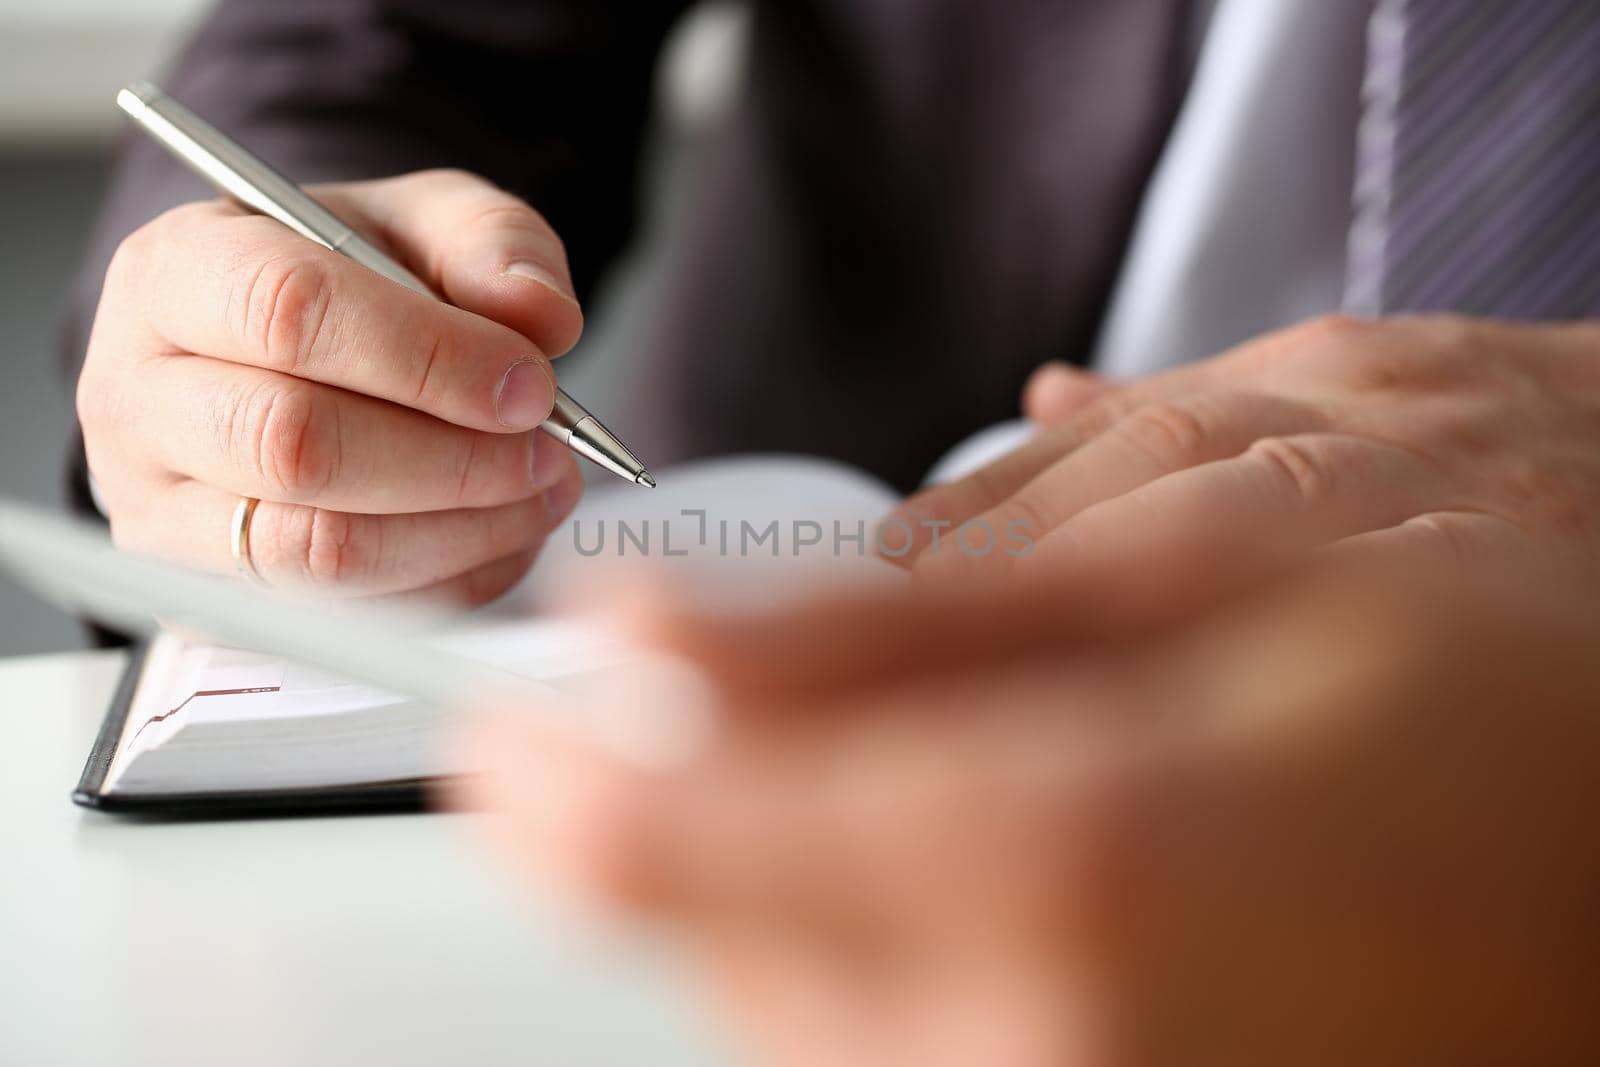 Hand of businessman in suit filling and signing with silver pen partnership agreement form clipped to pad closeup. Management training course some important document, team leader ambition concept